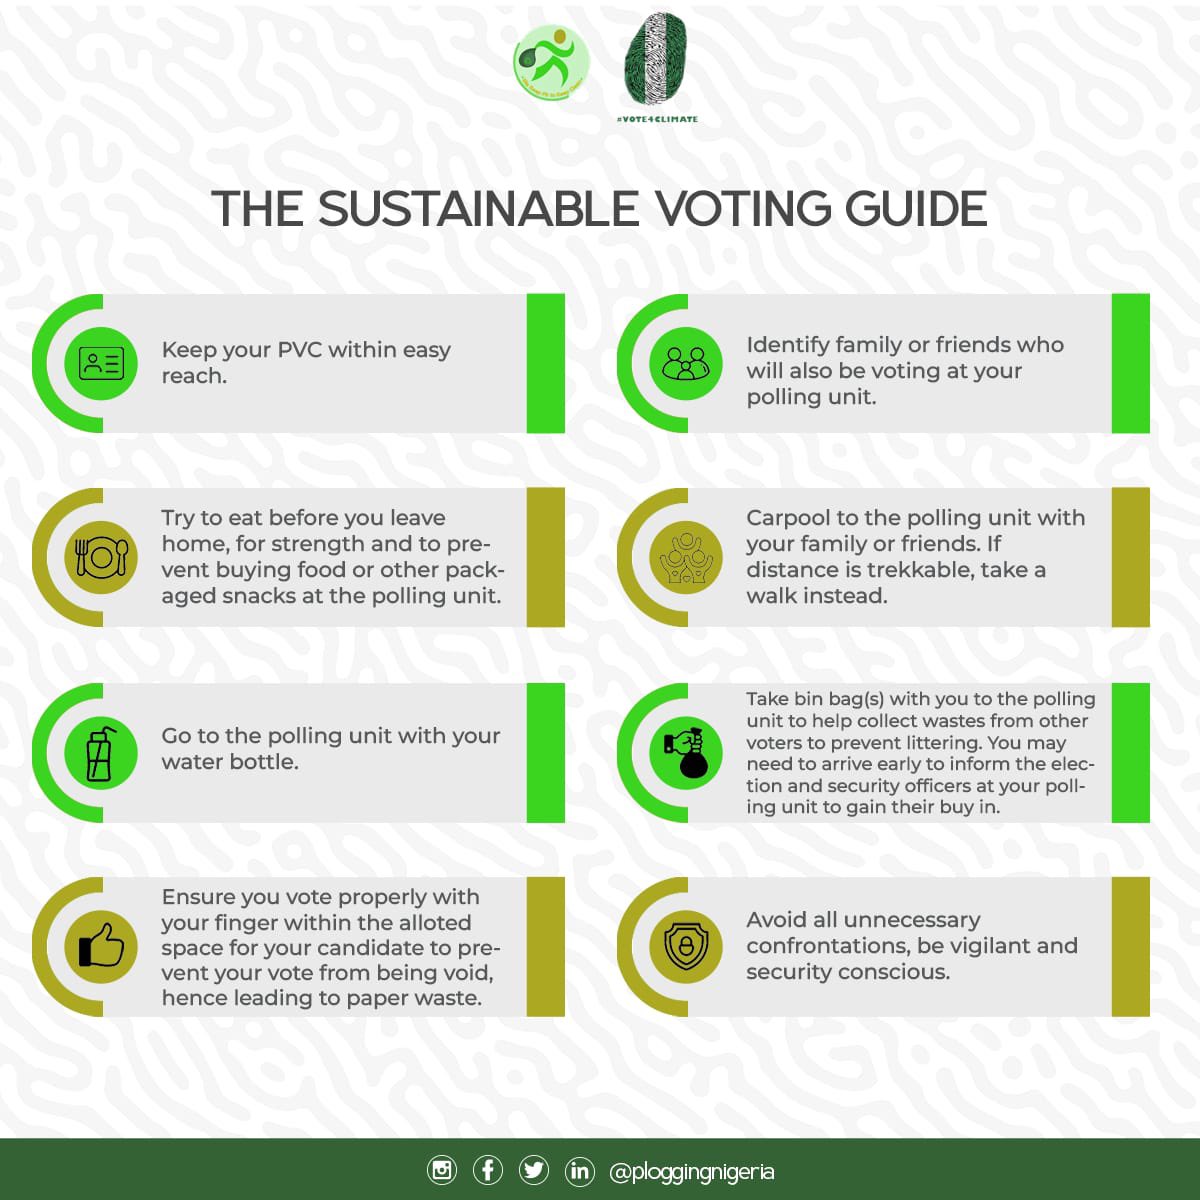 Few hours for Nigerians to decide - Vote Wisely

Vote for someone who has solid plans for a sustainable environment and future.
 #Vote4climate #vote4climateng #Nigeriadecide2023